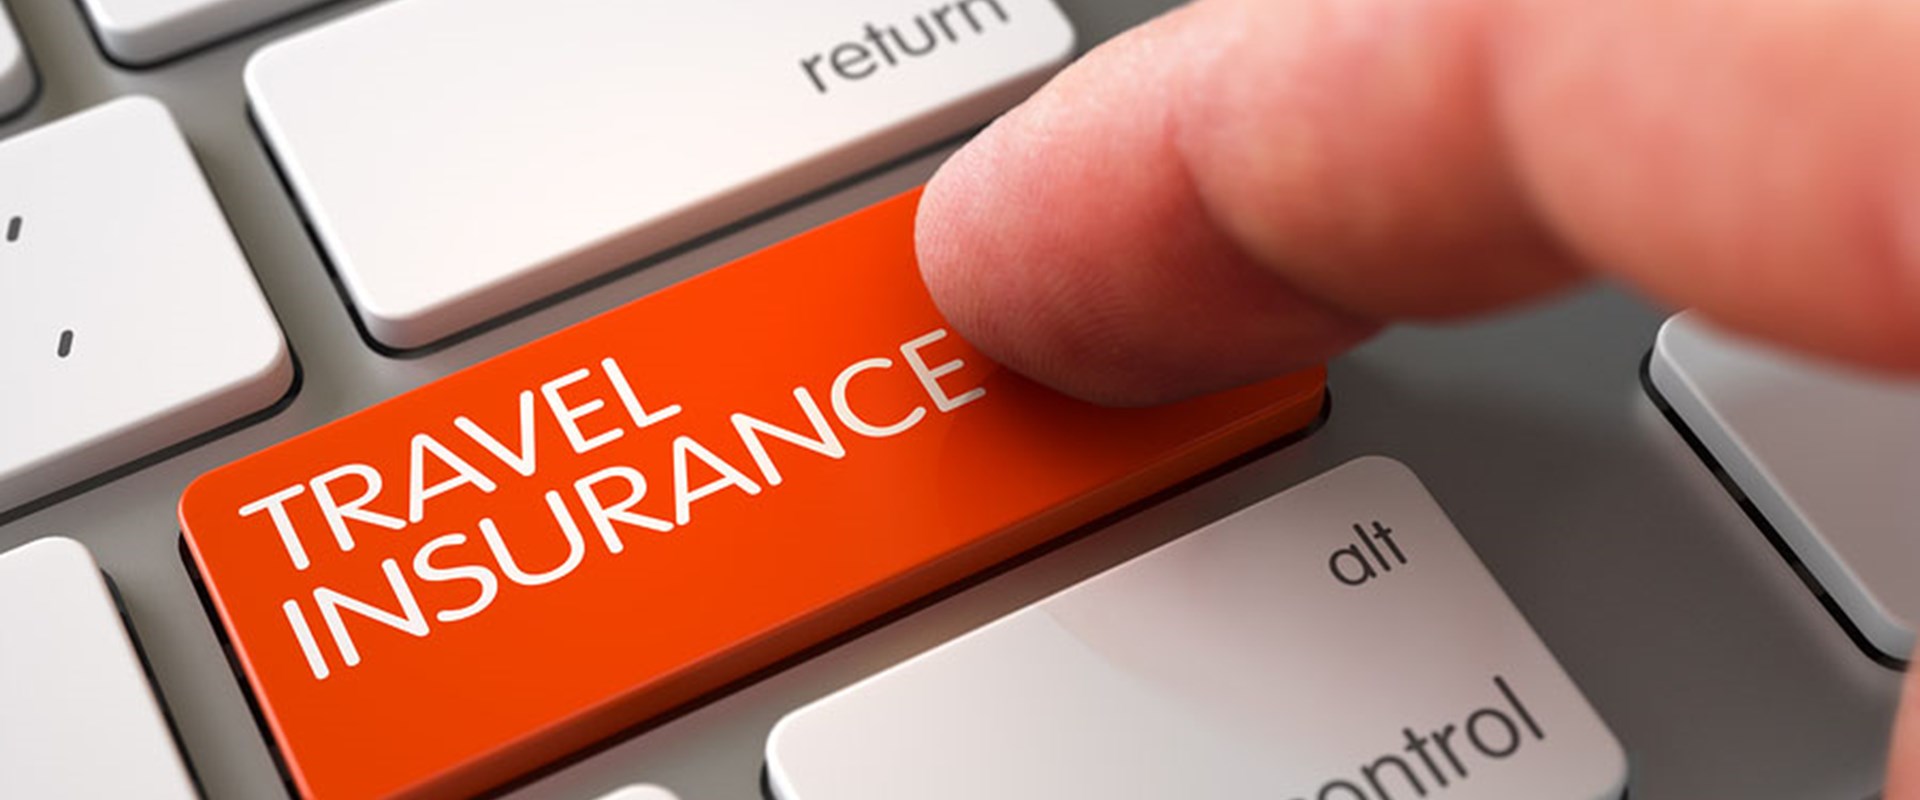 Things to Know Before Purchasing Travel Insurance